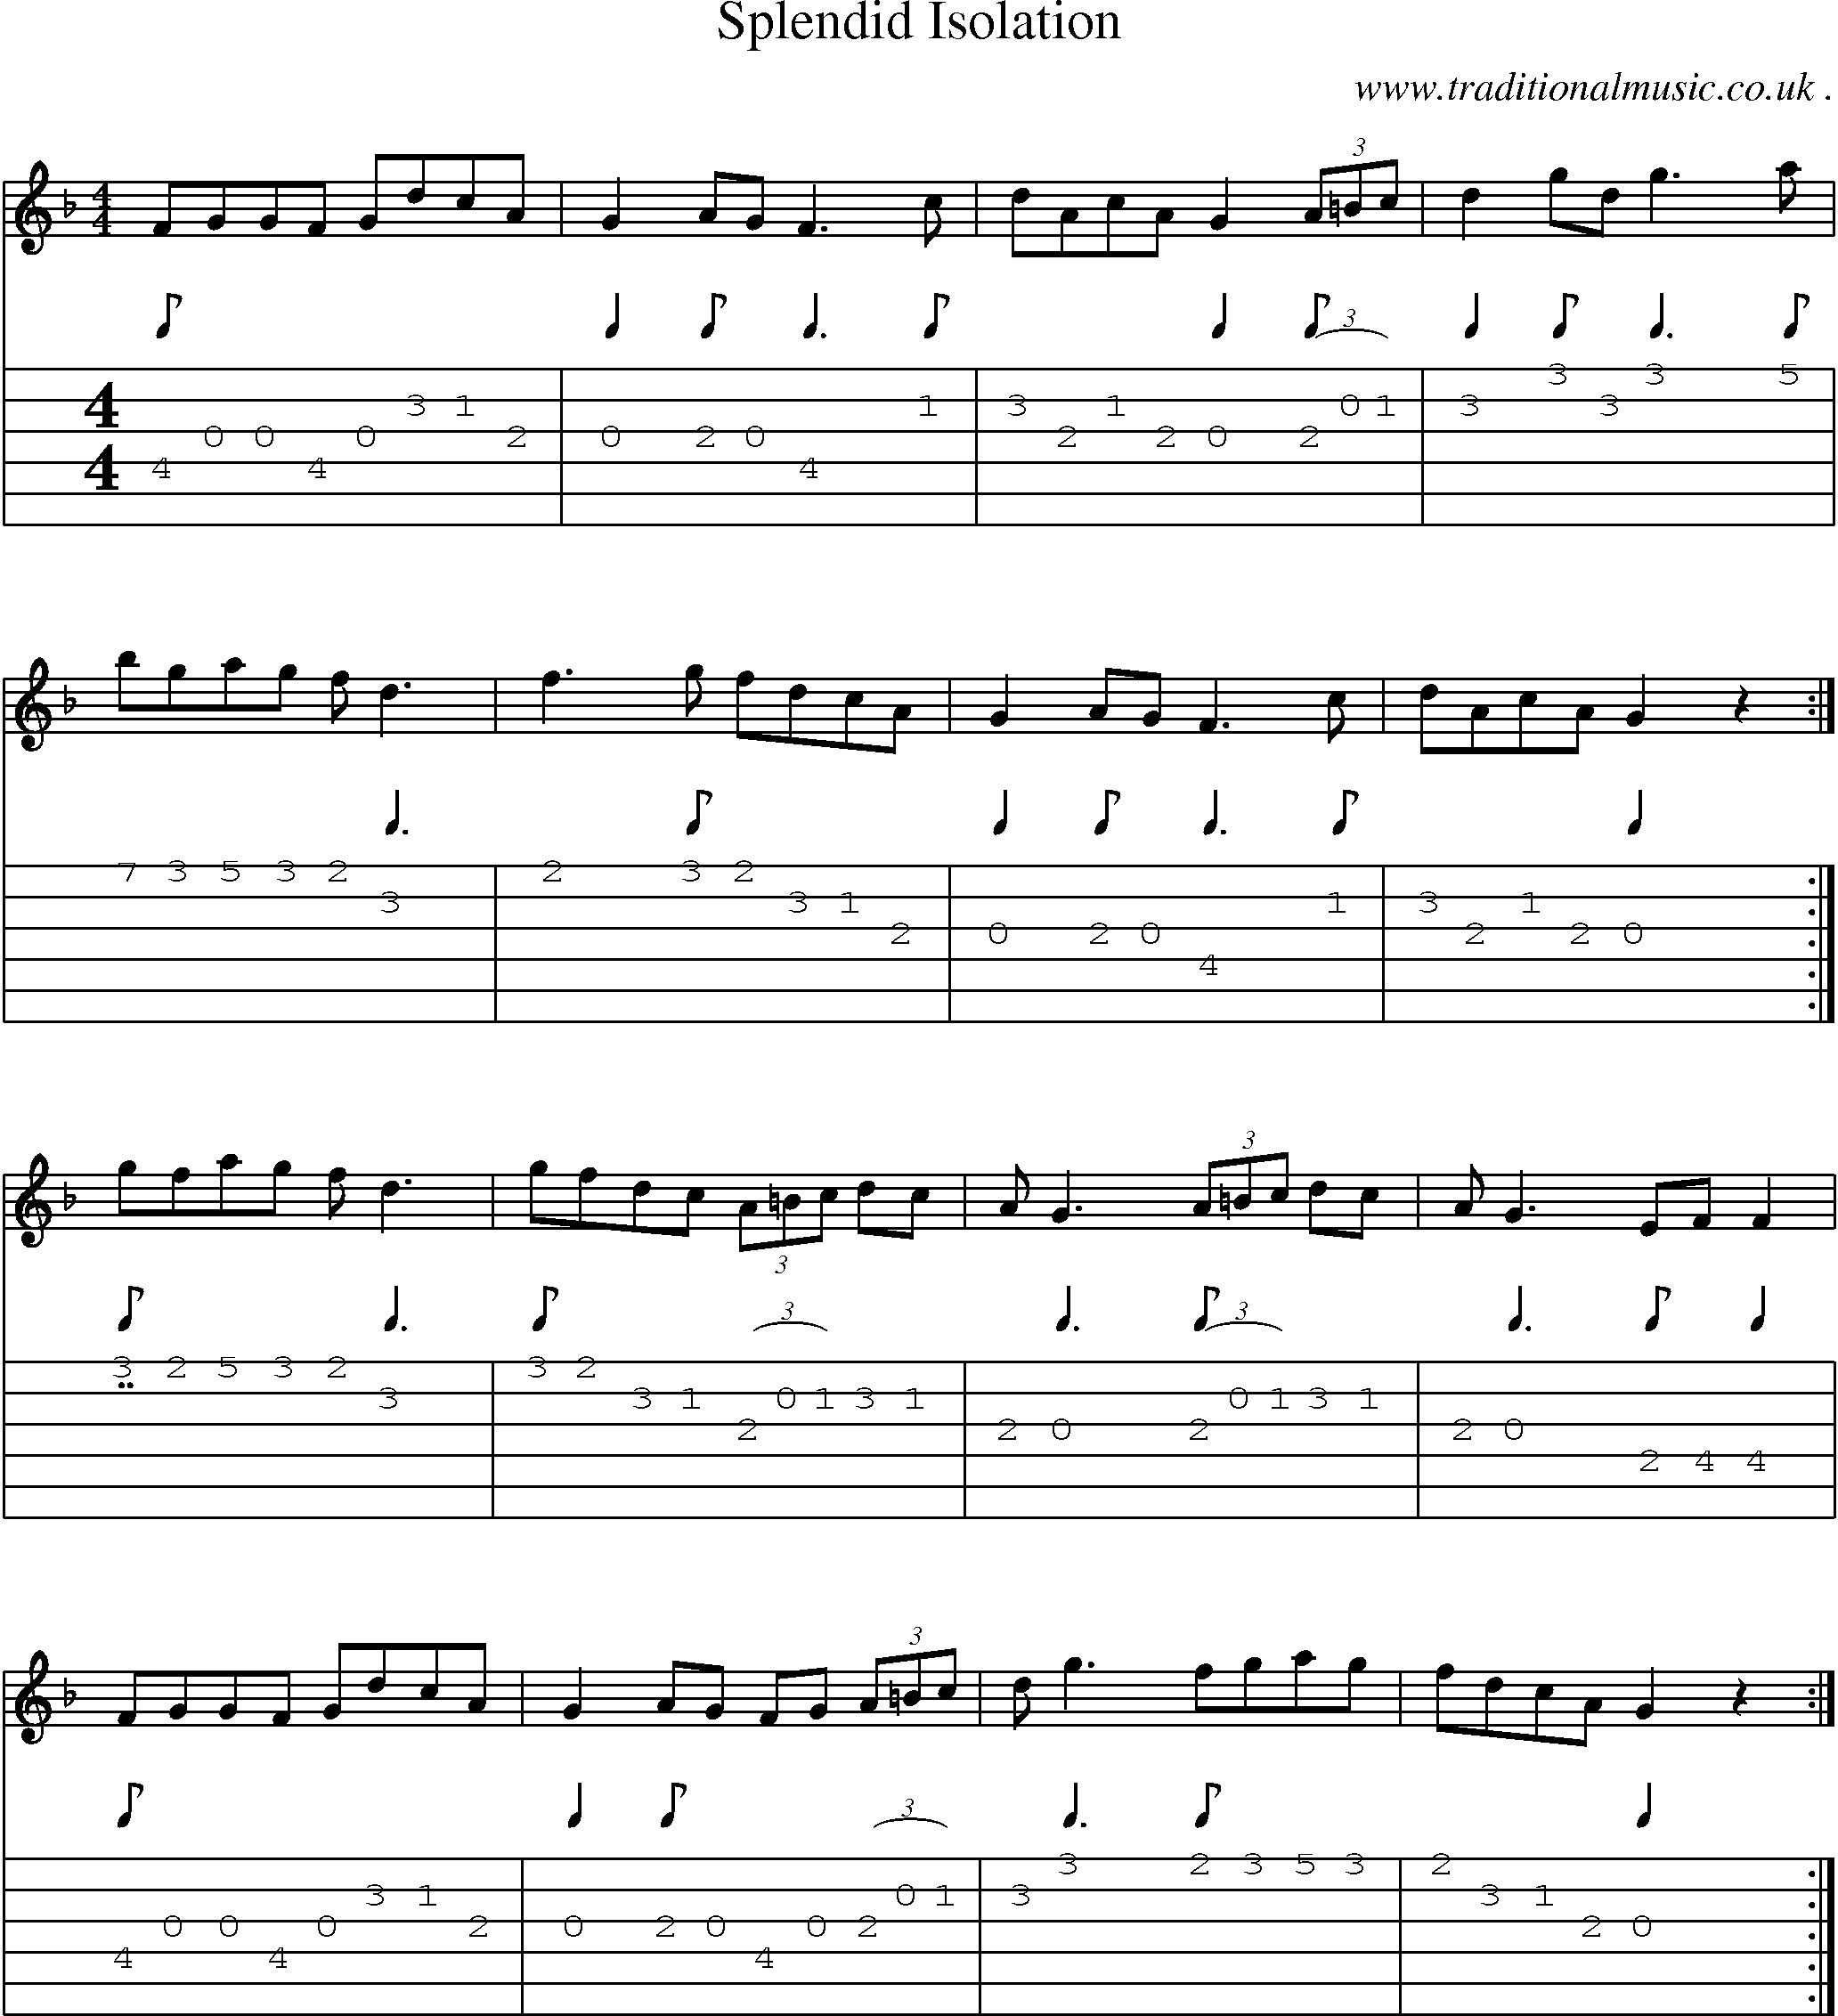 Sheet-Music and Guitar Tabs for Splendid Isolation